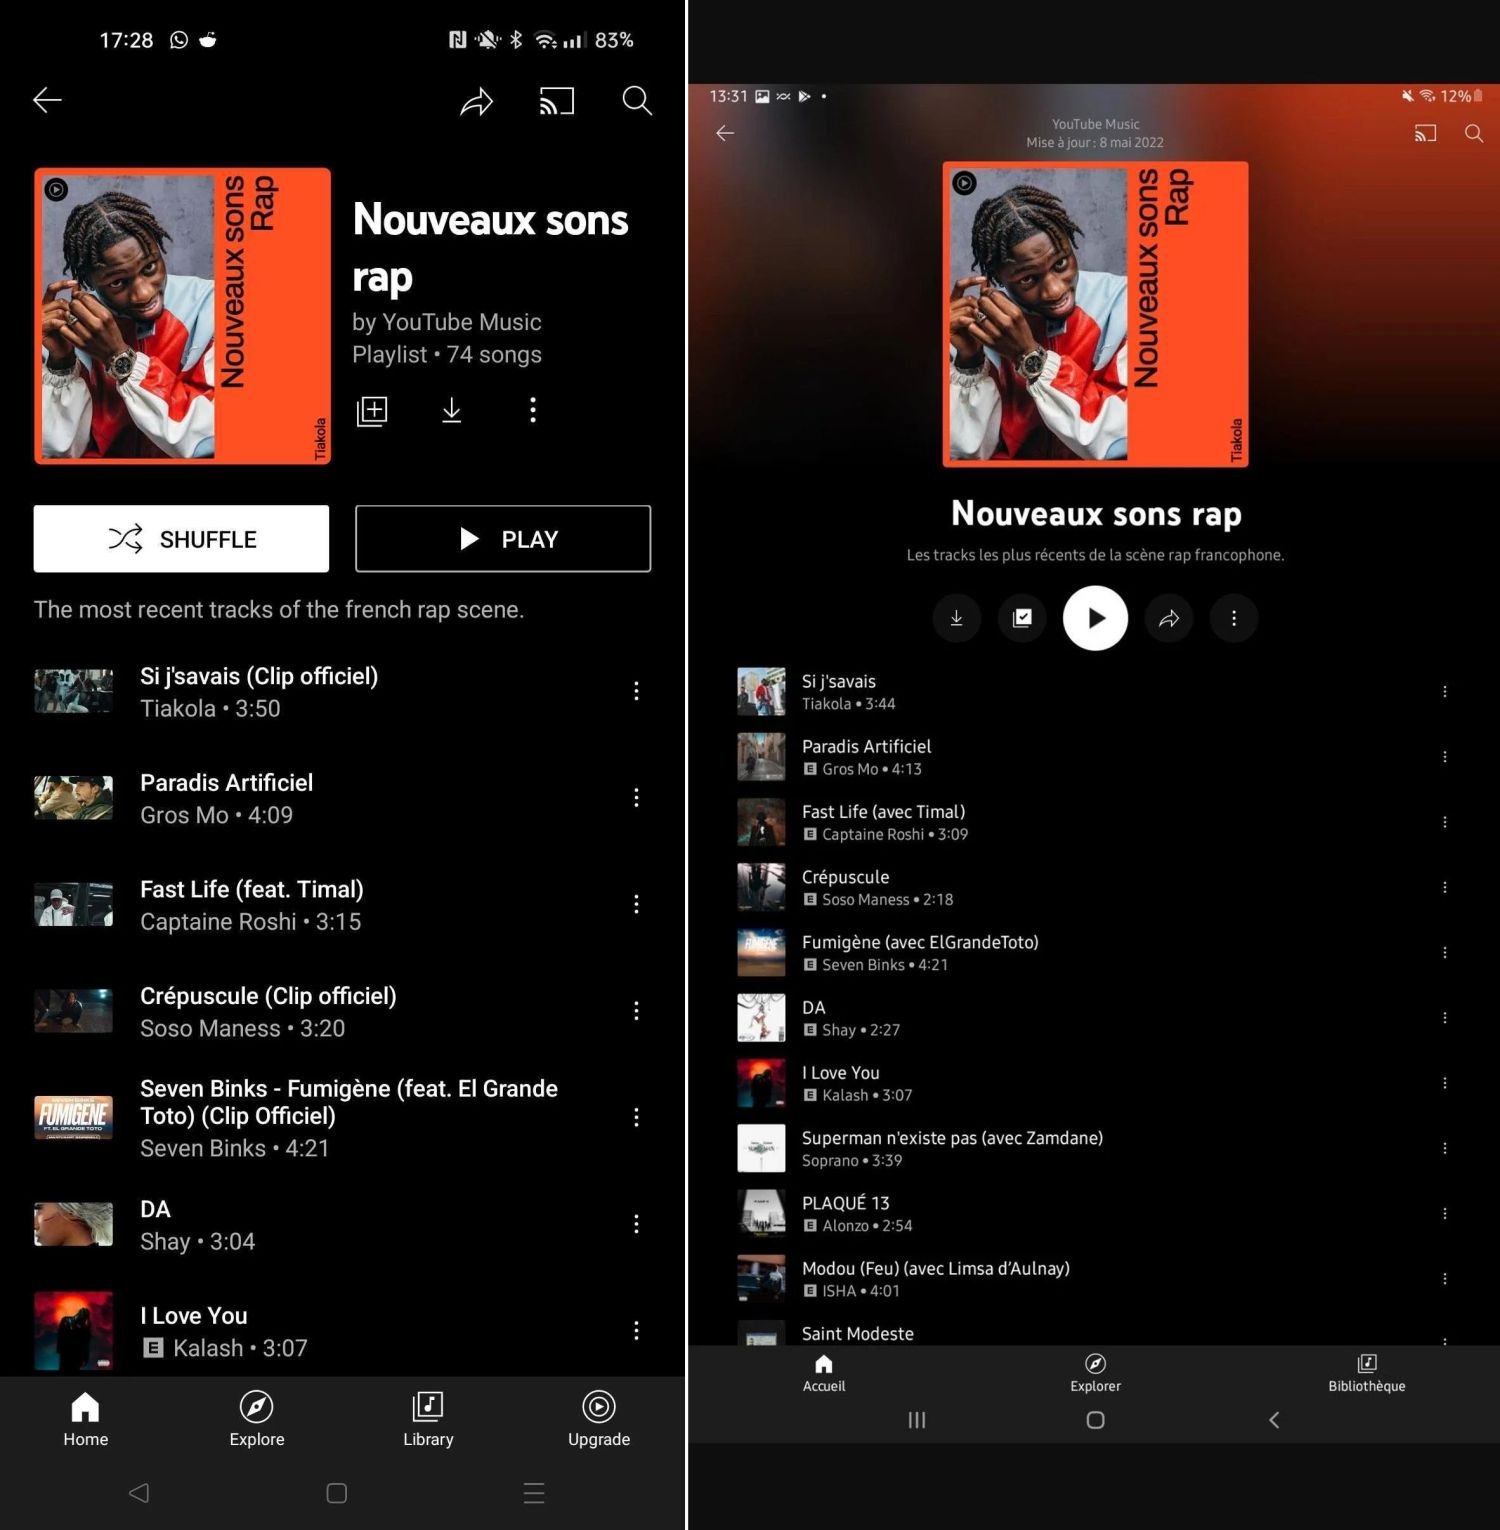 youtube music android app new design